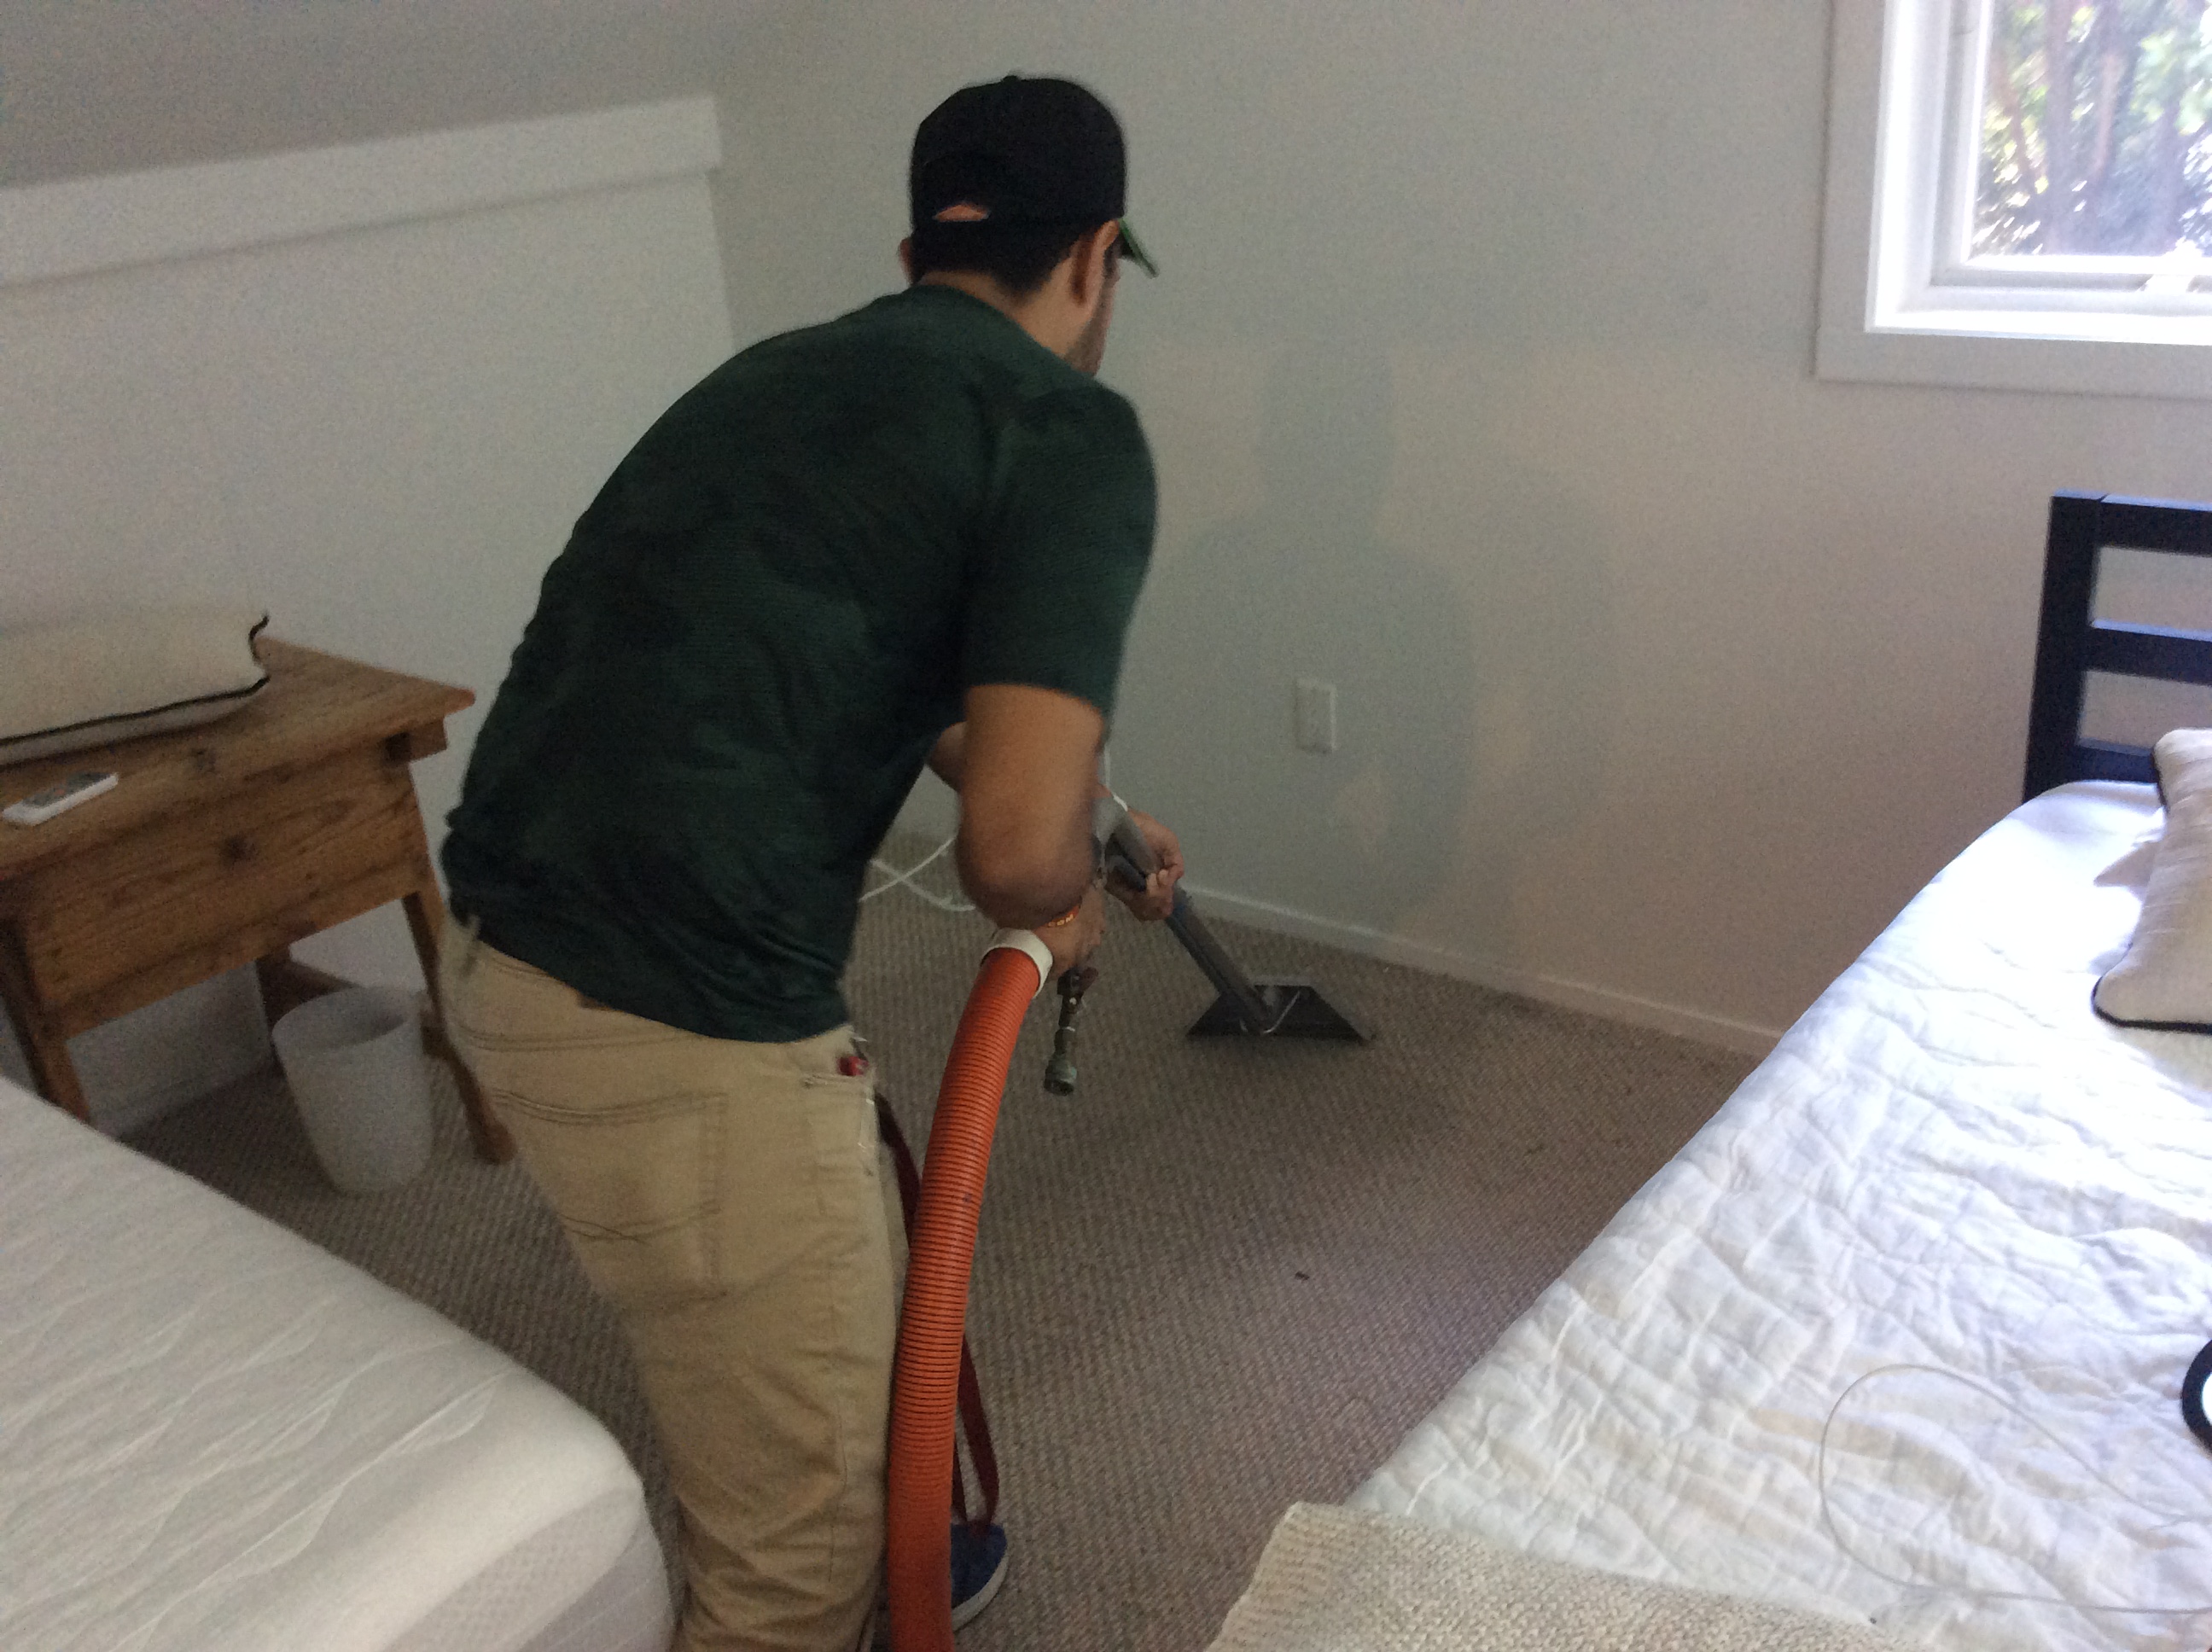 A SERVPRO technician extracting the water from the carpet in this home at Century Village.